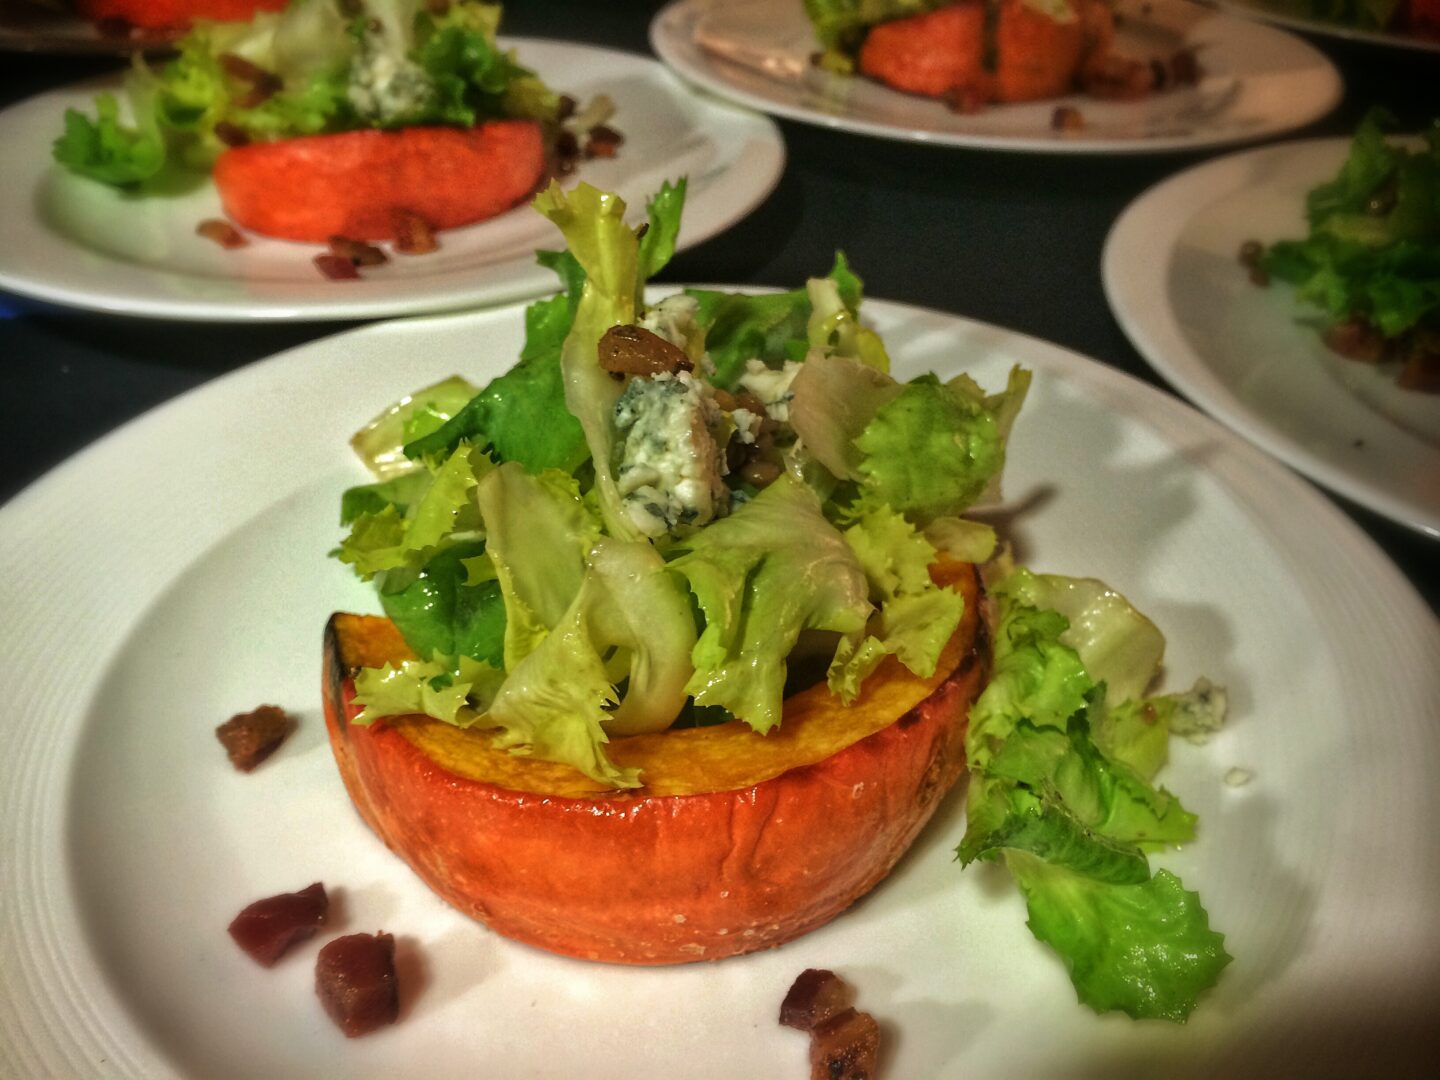 Stuffed squash salad with blue cheese and walnuts.